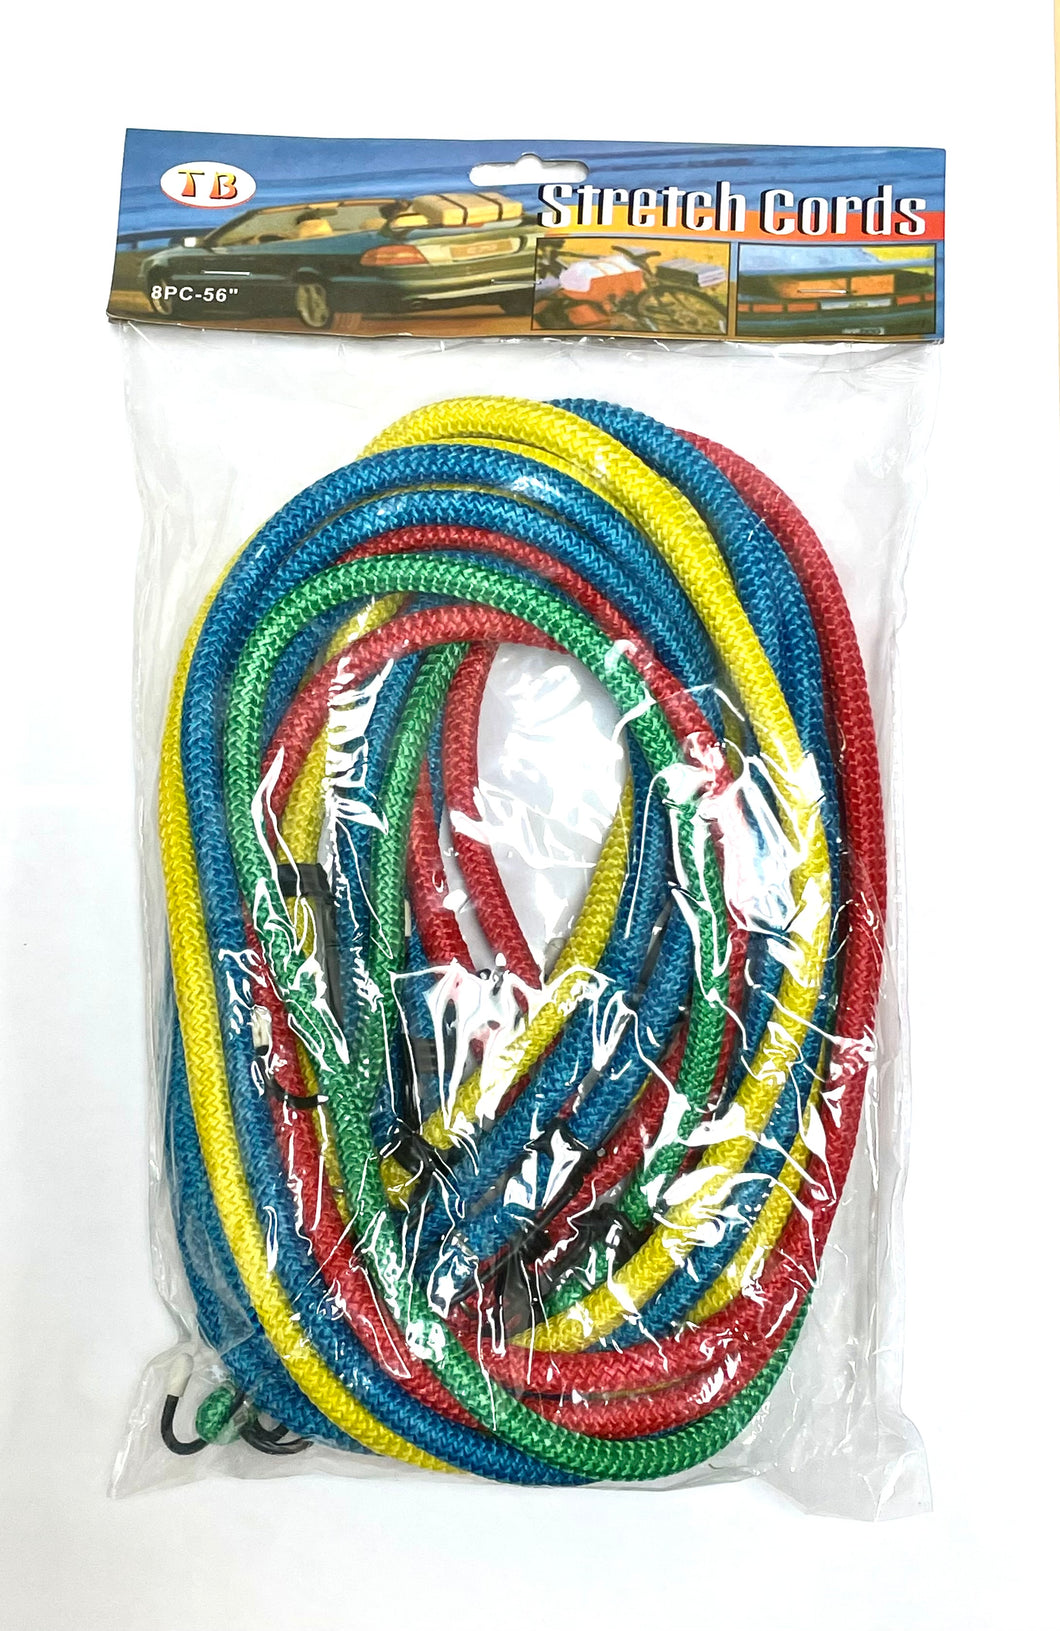 Assorted Bungee Stretch Cords (8 PCs)